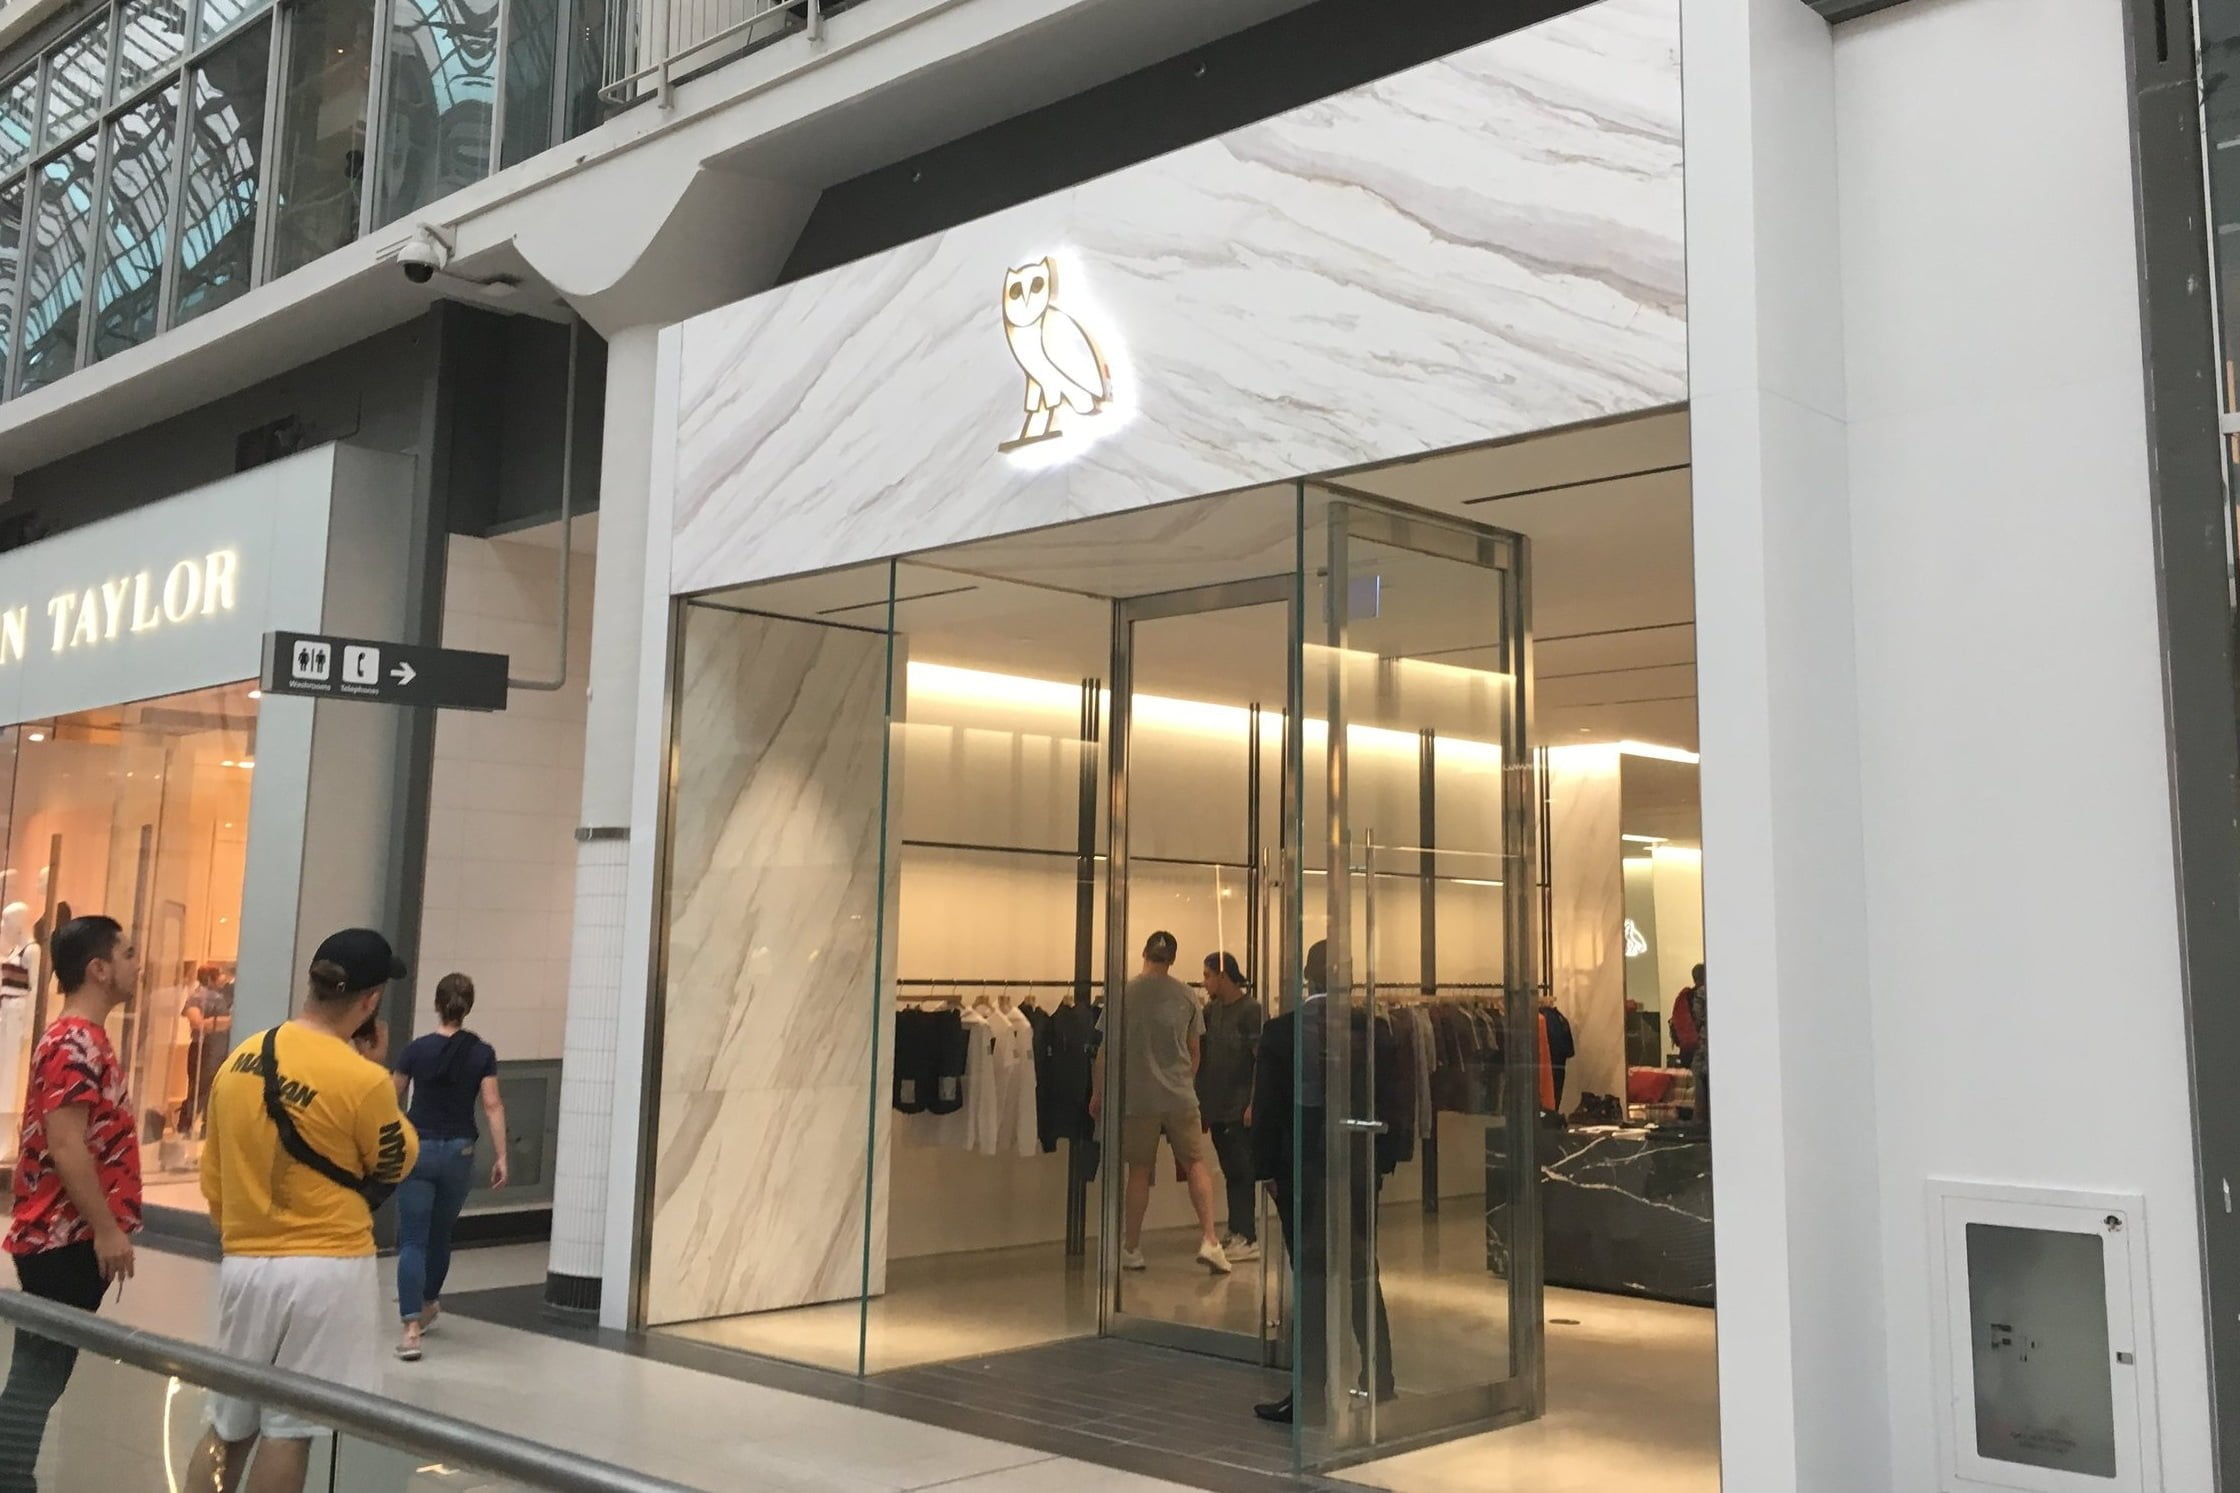 Soeverein Conflict Milieuvriendelijk Drake's 'OVO' Brand Continues Canadian Store Expansion with High Profile  Location [Photos]